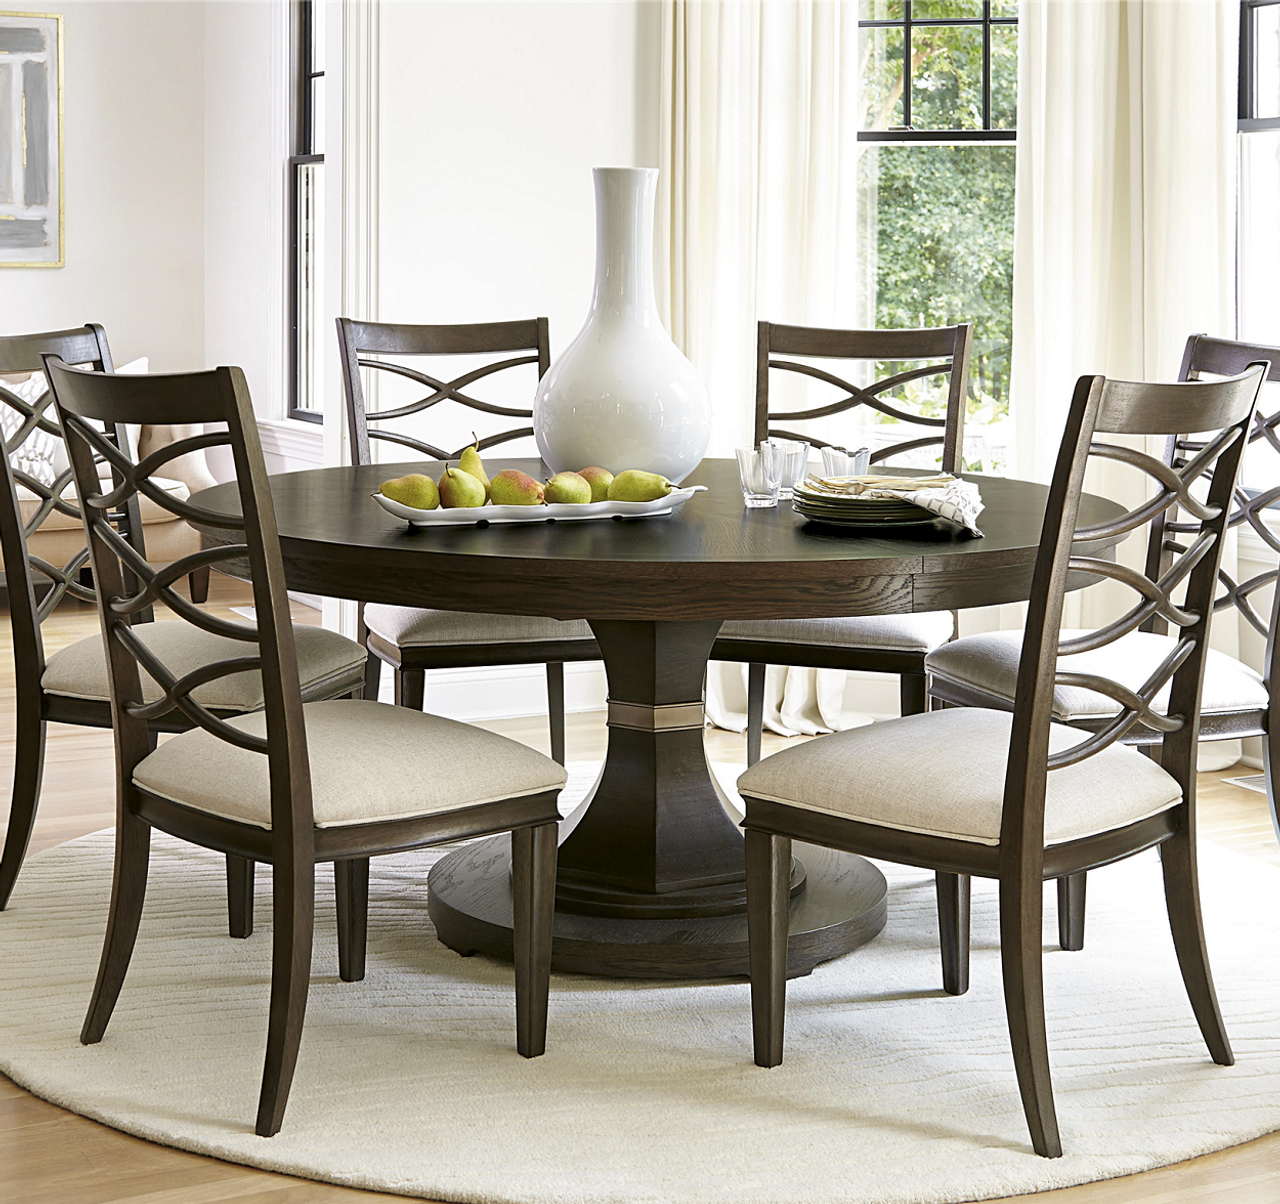 California Rustic Oak Expandable Round Dining Table 64" | Zin Home